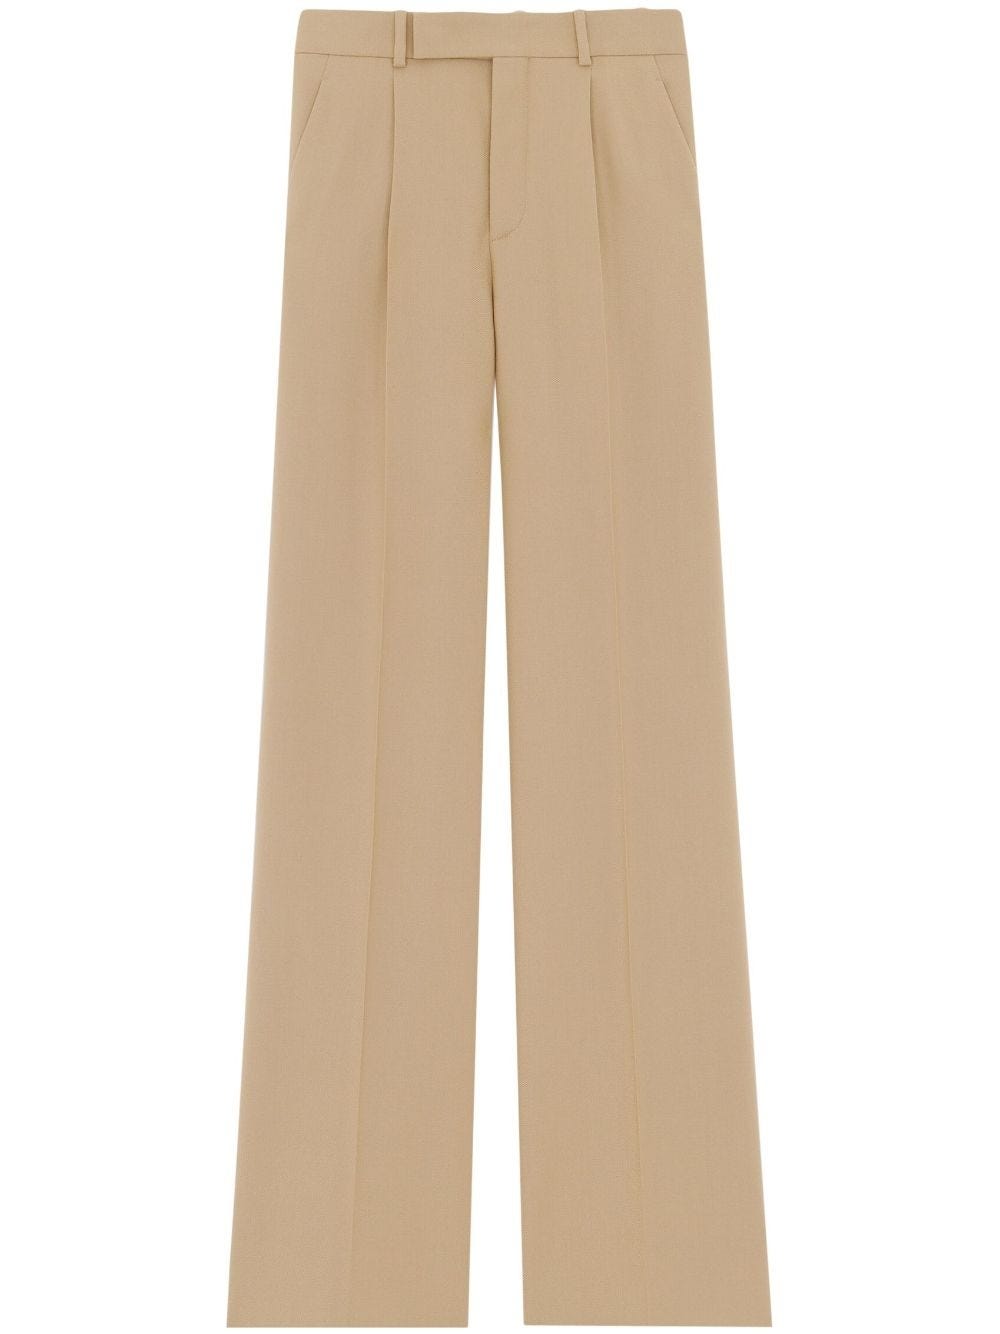 SAINT LAURENT HIGH-WAISTED BEIGE TAILORED TROUSERS